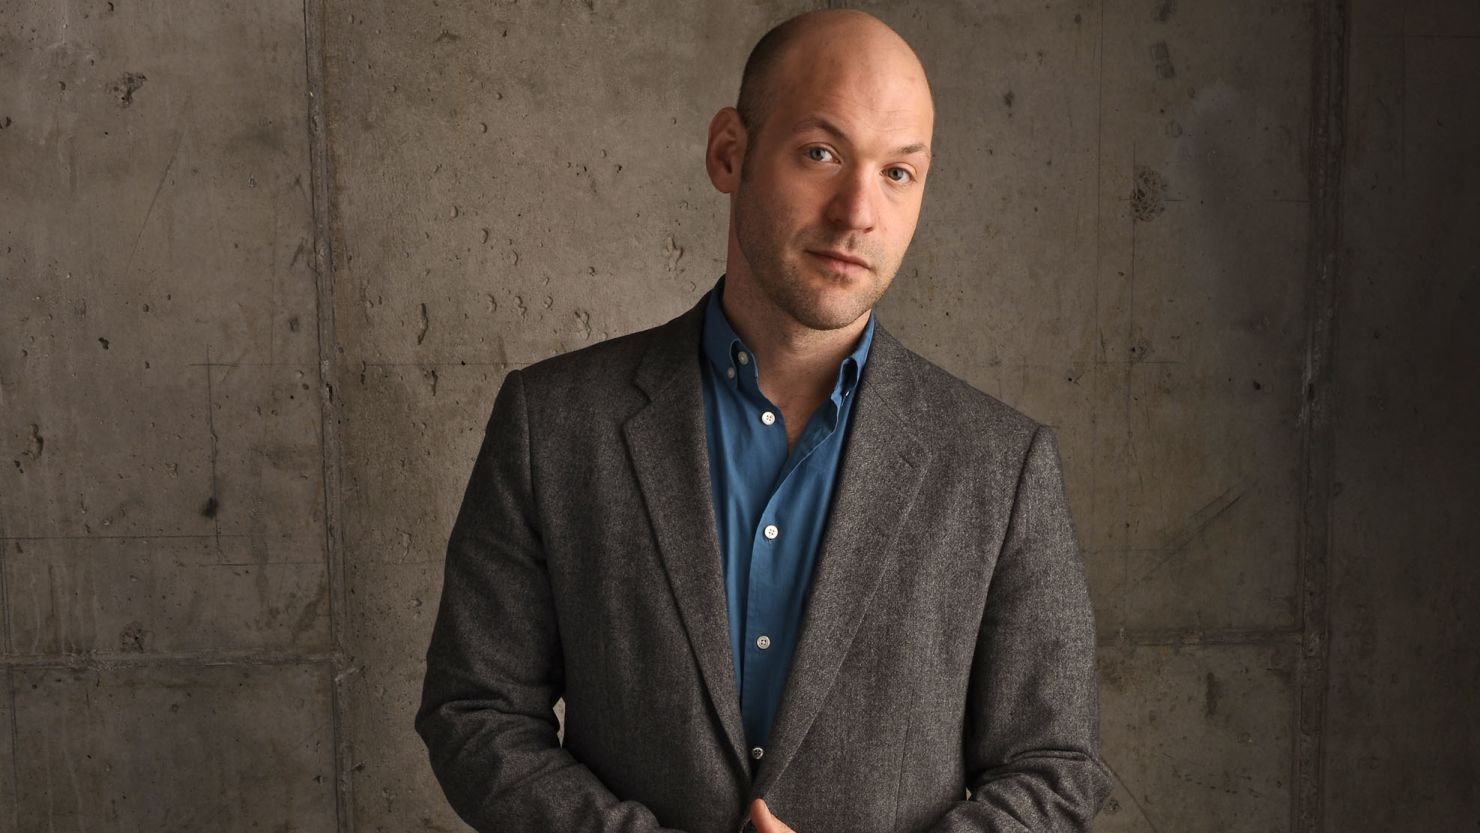 Corey Stoll earned a Golden Globe nomination for his role on "House of Cards"